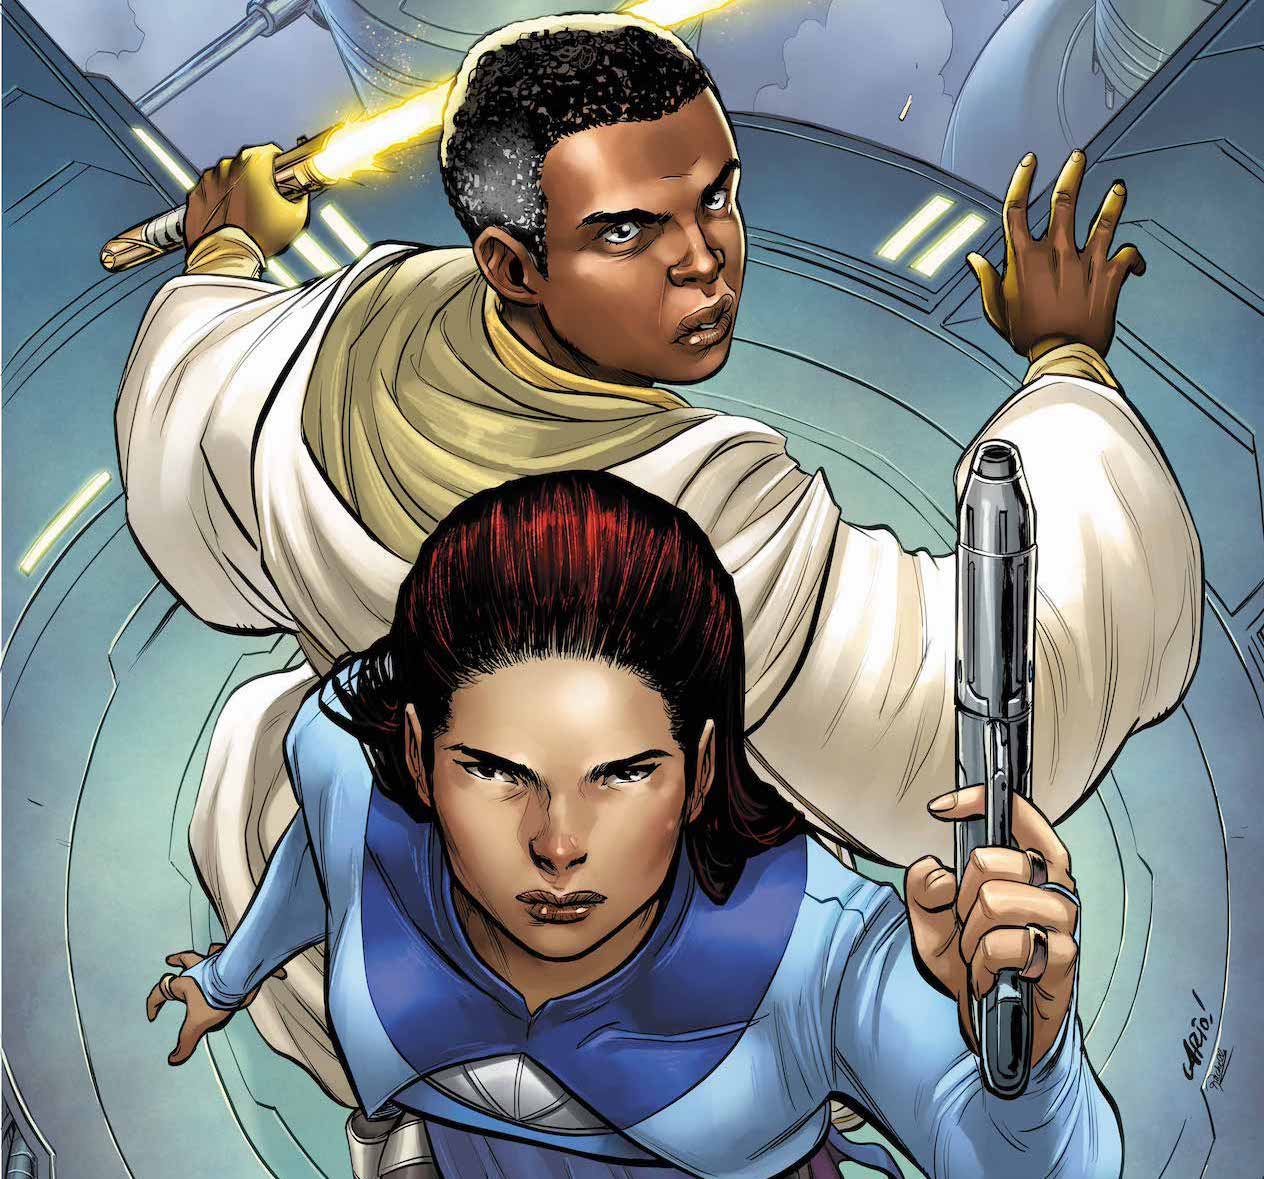 Marvel announces new series 'Star Wars: The High Republic: Trial of Shadows'